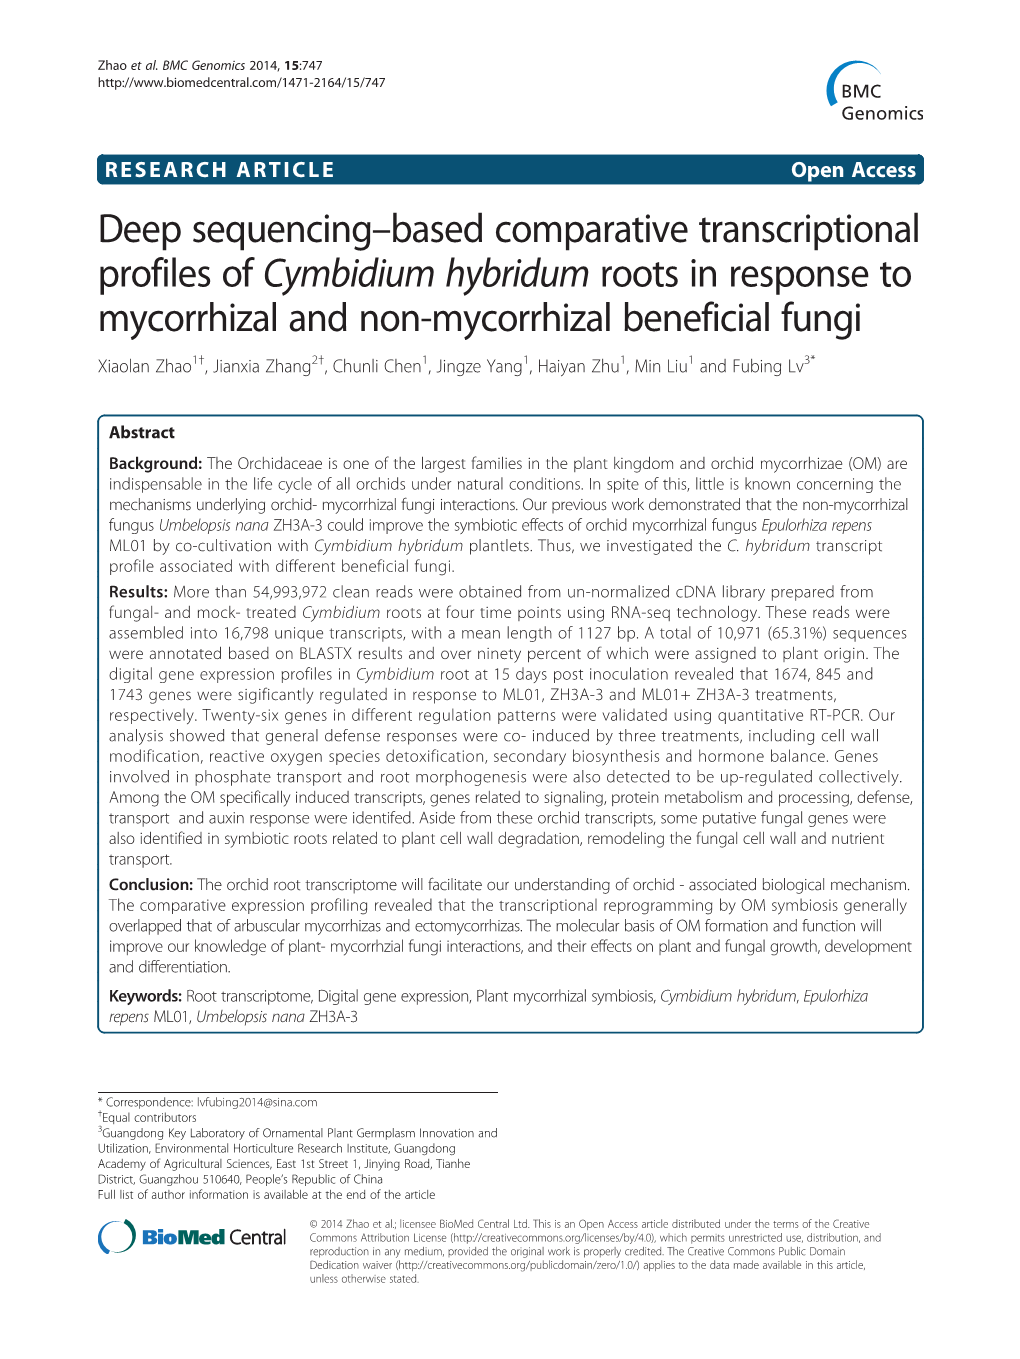 Deep Sequencing-Based Comparative Transcriptional Profiles Of